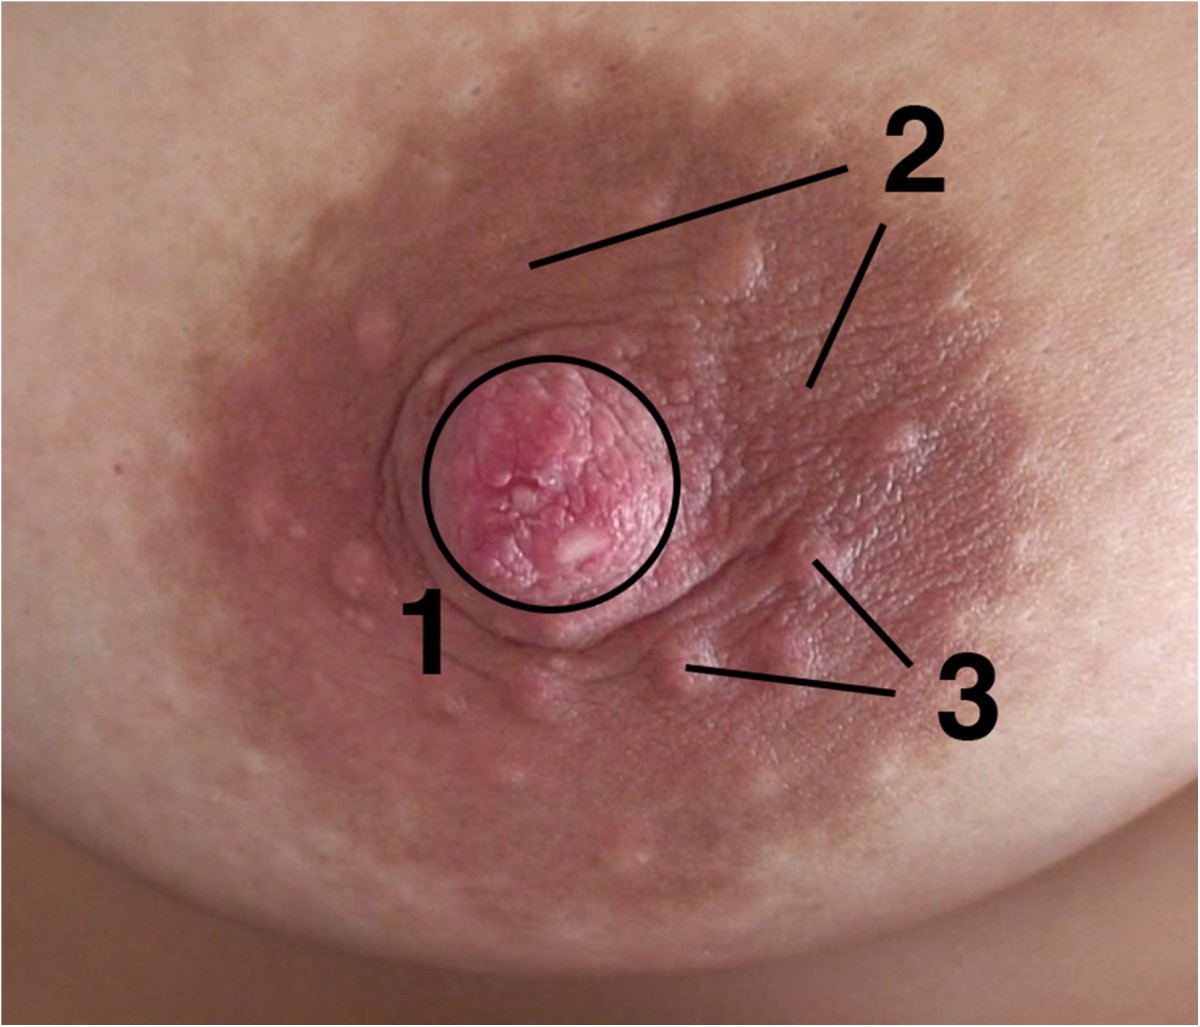 What Your Nipple Could Be Communicating About Your Health